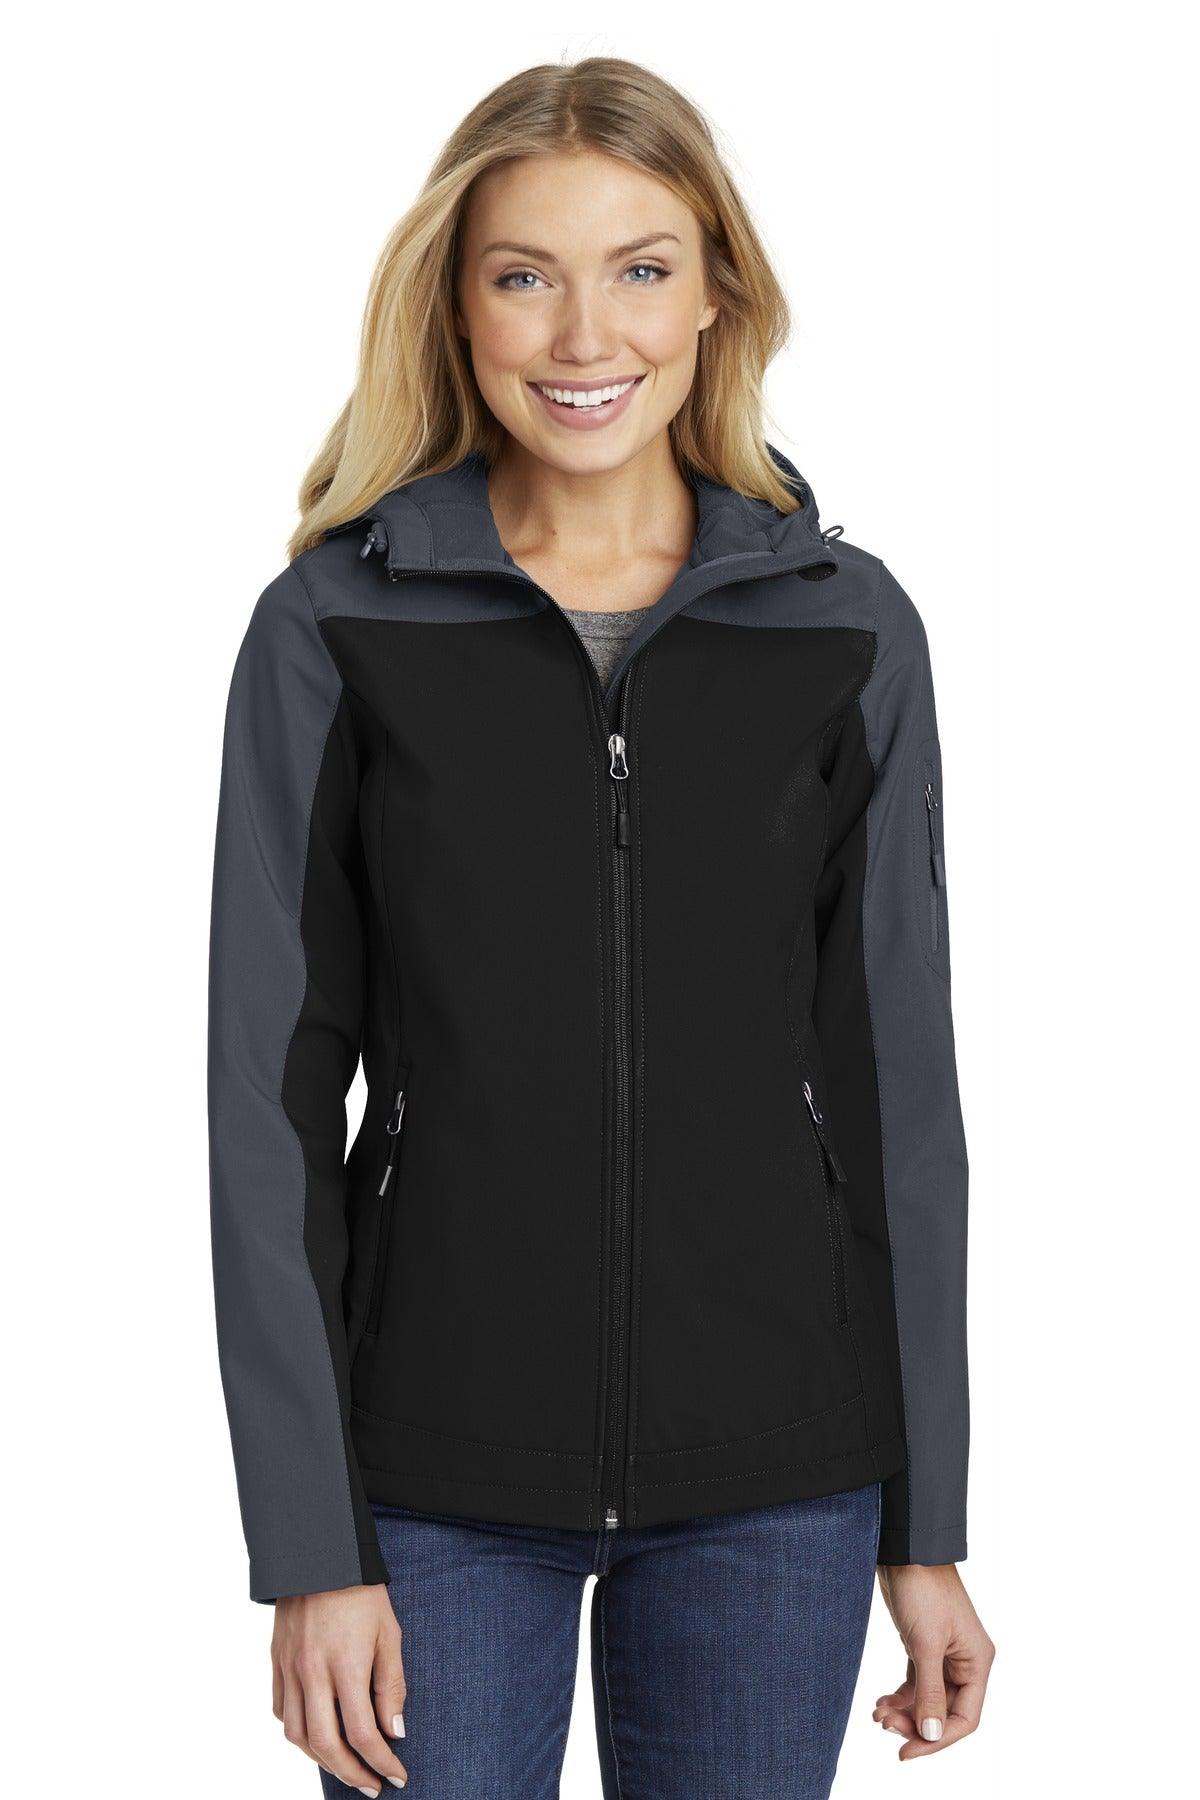 Port Authority Ladies Hooded Core Soft Shell Jacket. L335 - Dresses Max